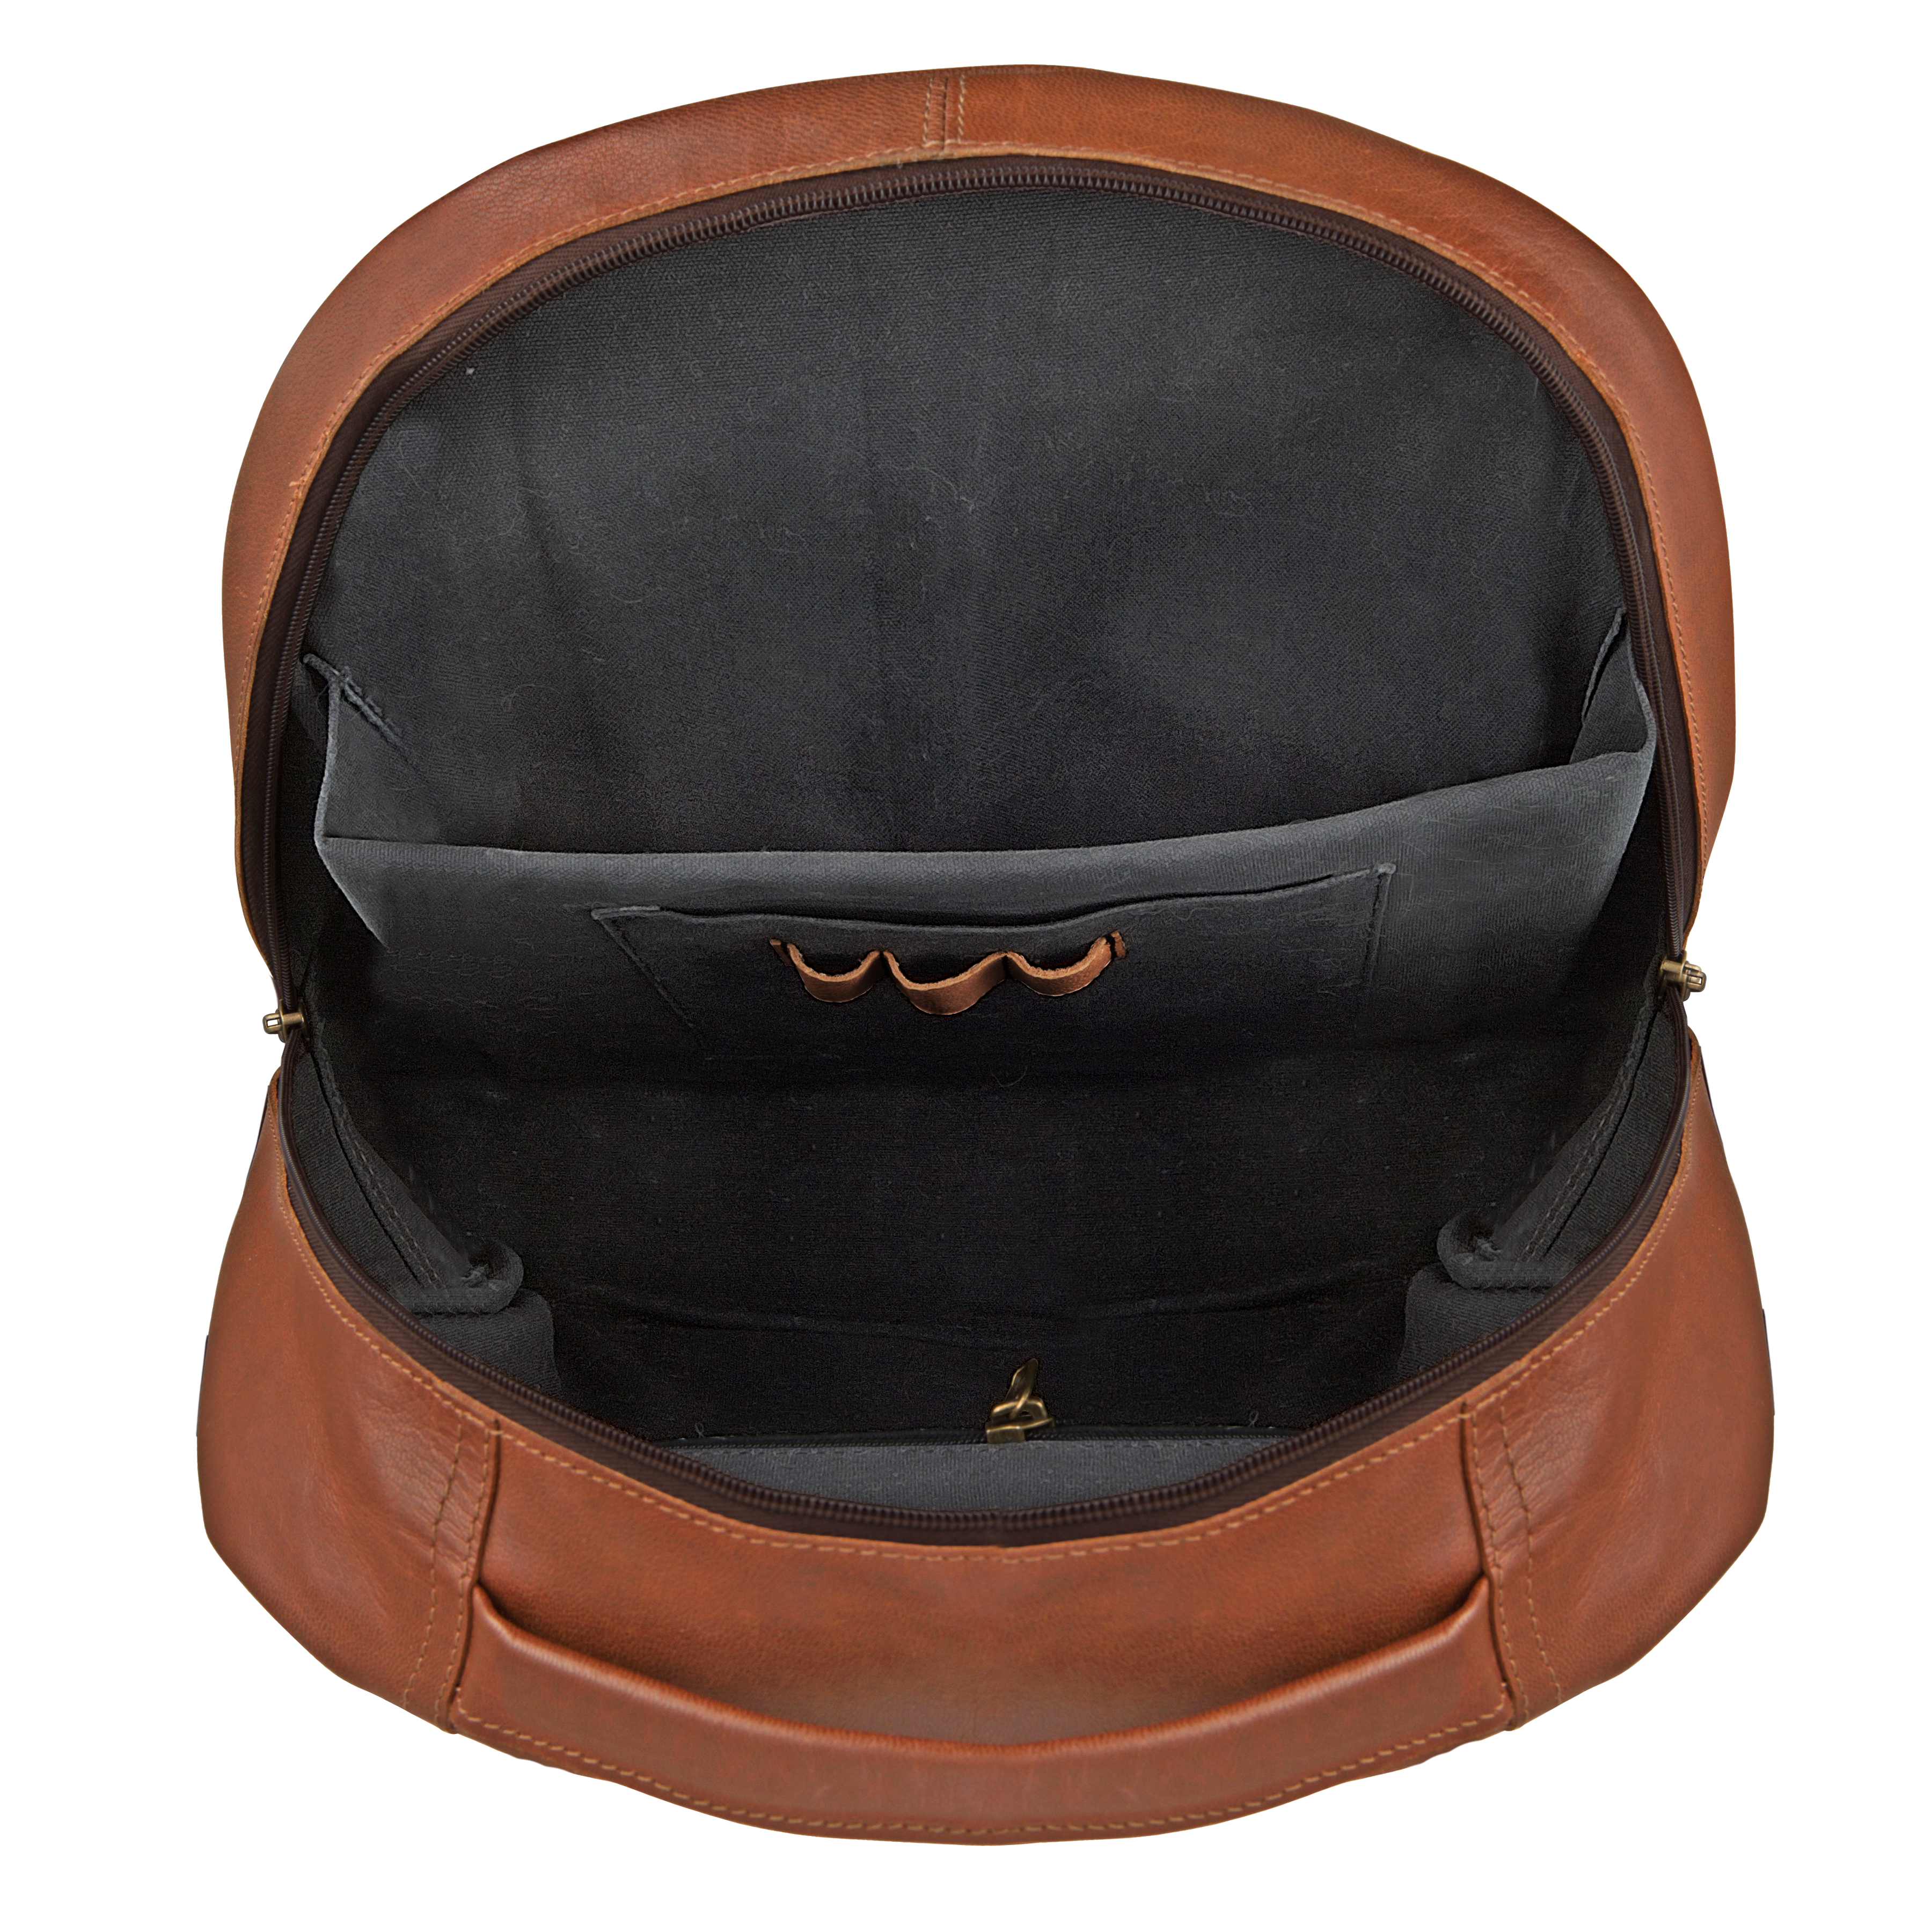 Uptown Backpack by Johnny Fly